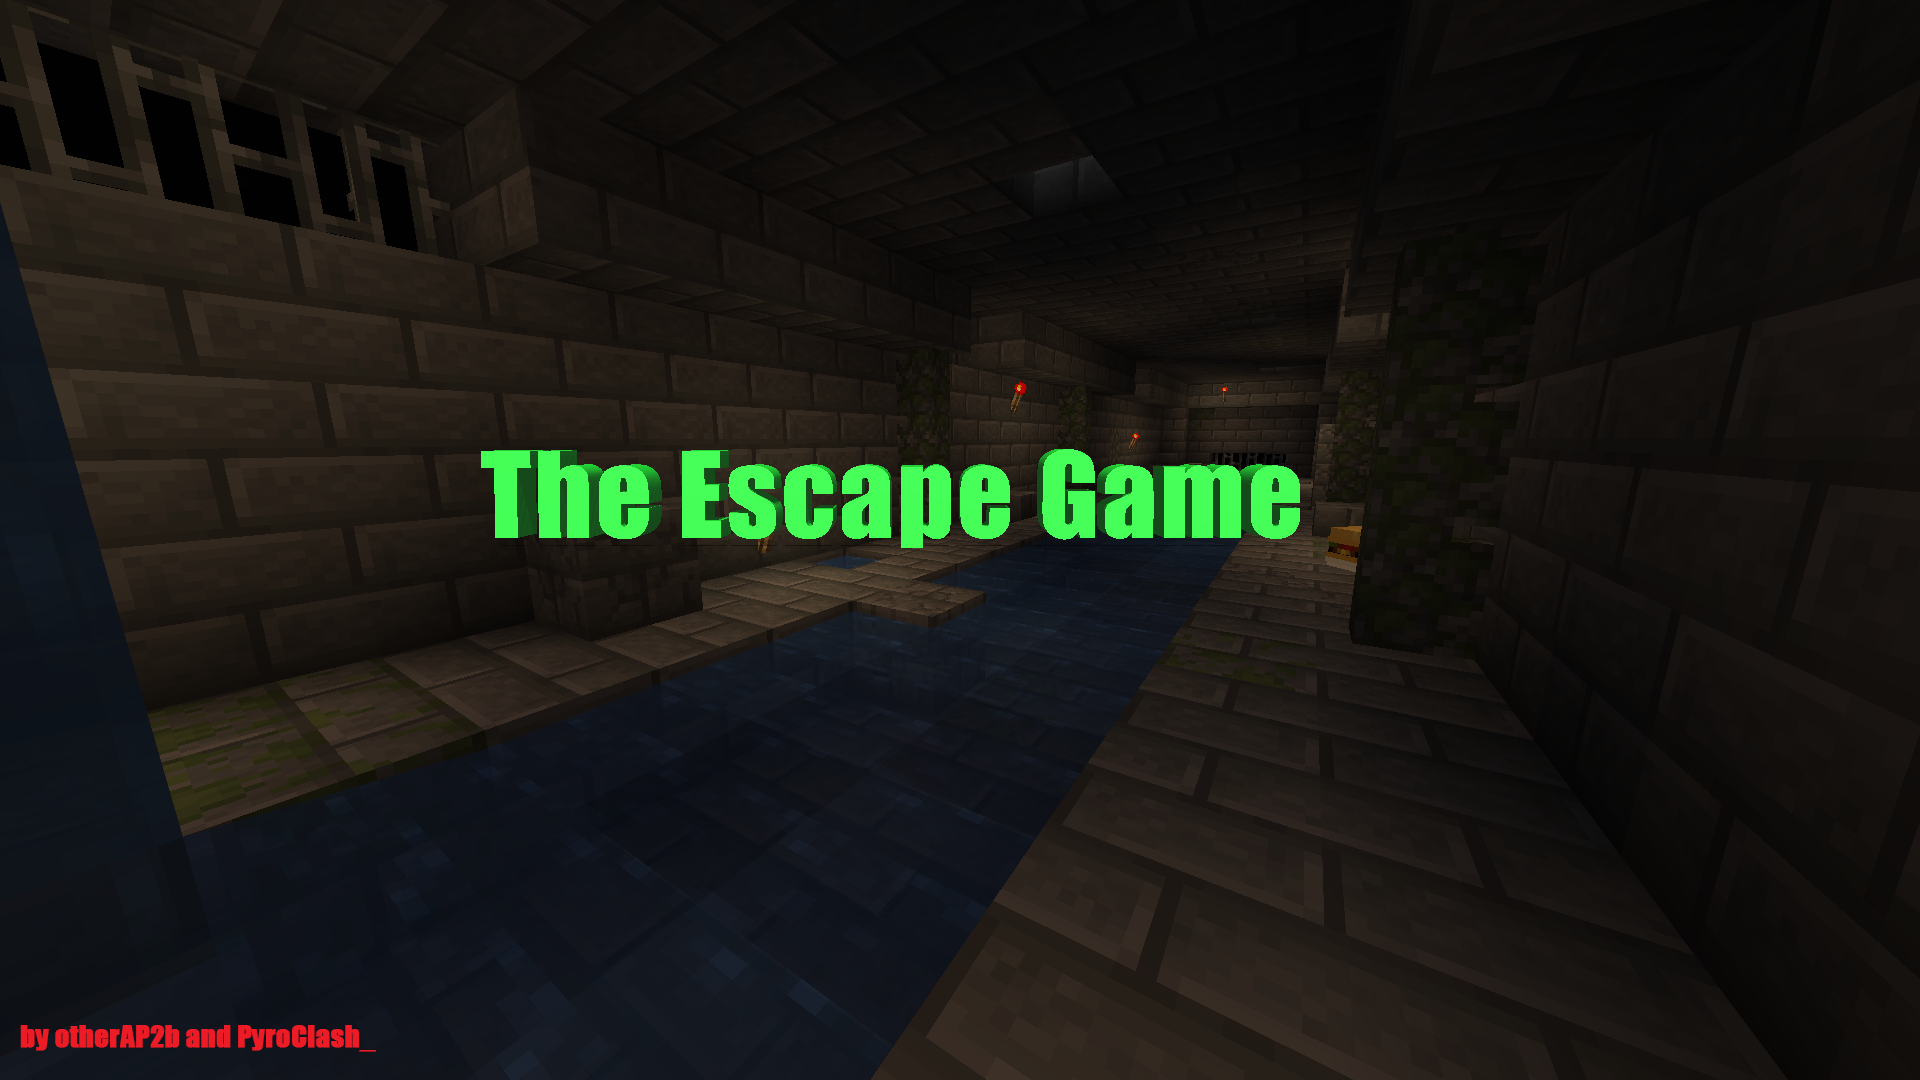 Download The Escape Game for Minecraft 1.15.2